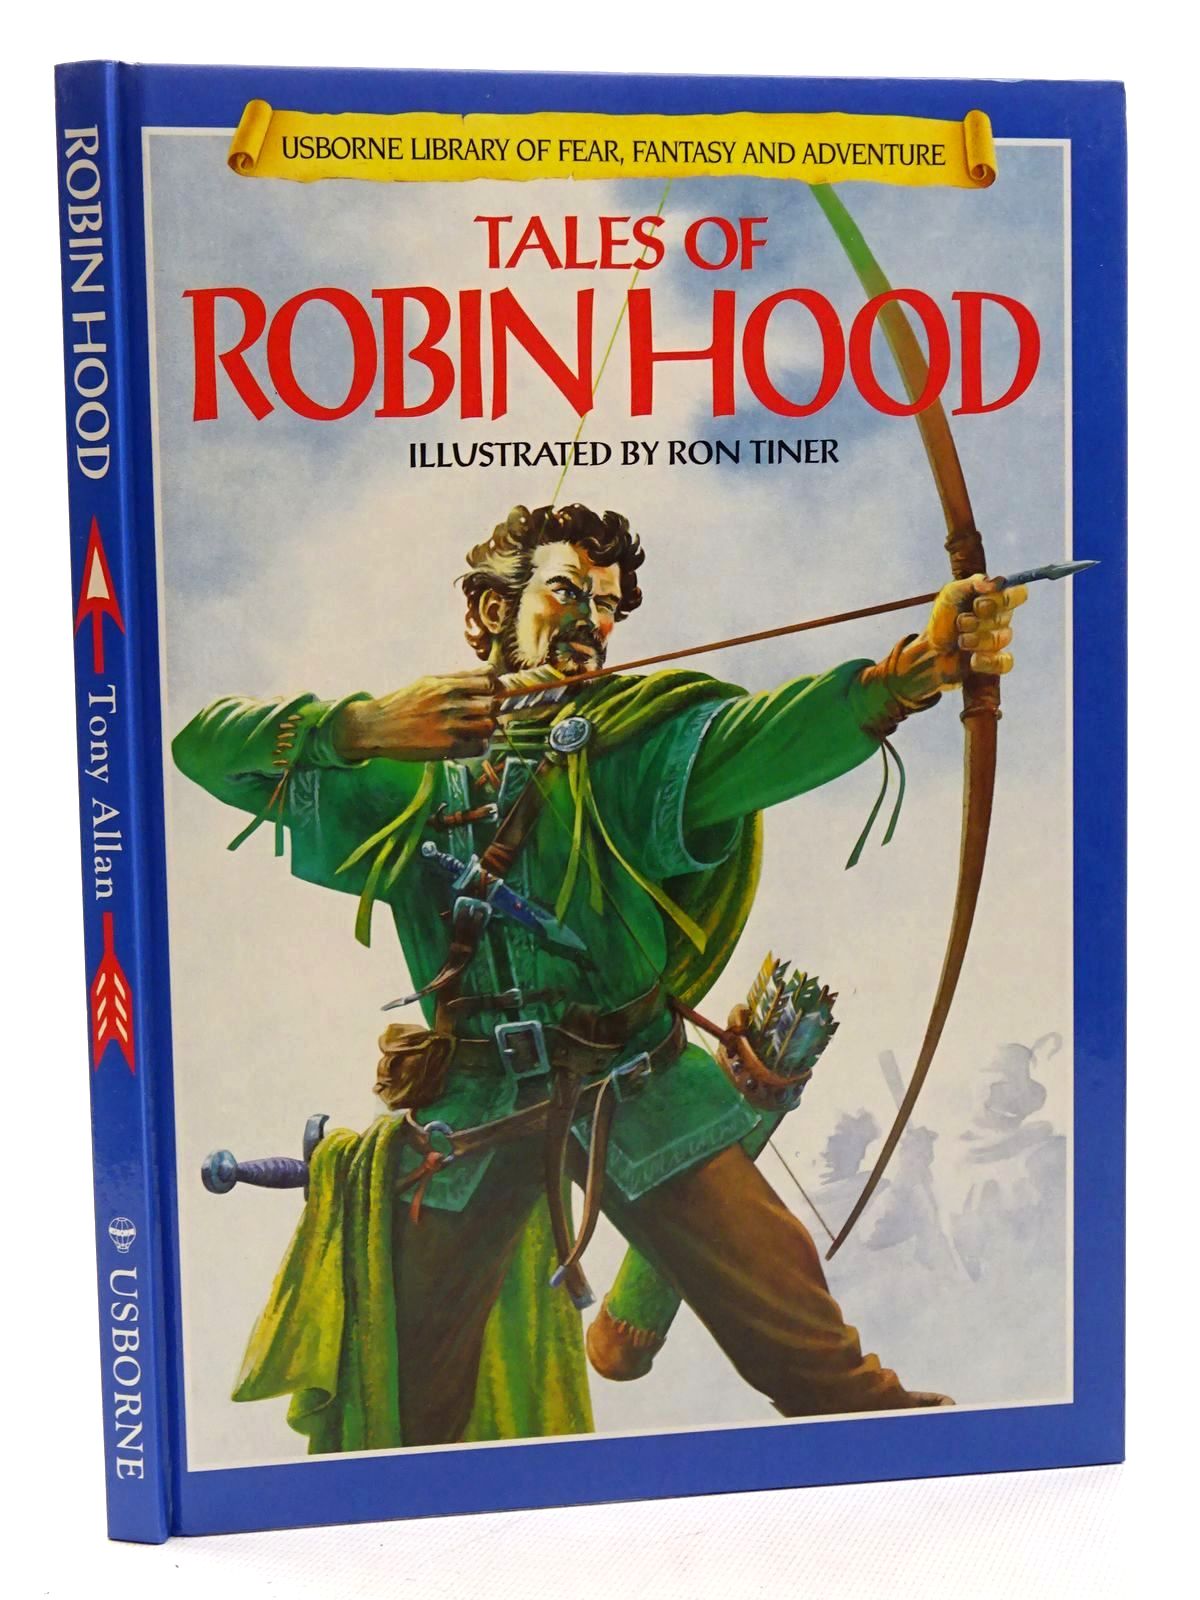 Photo of TALES OF ROBIN HOOD written by Allan, Tony illustrated by Tiner, Ron published by Usborne Publishing Ltd. (STOCK CODE: 2125220)  for sale by Stella & Rose's Books